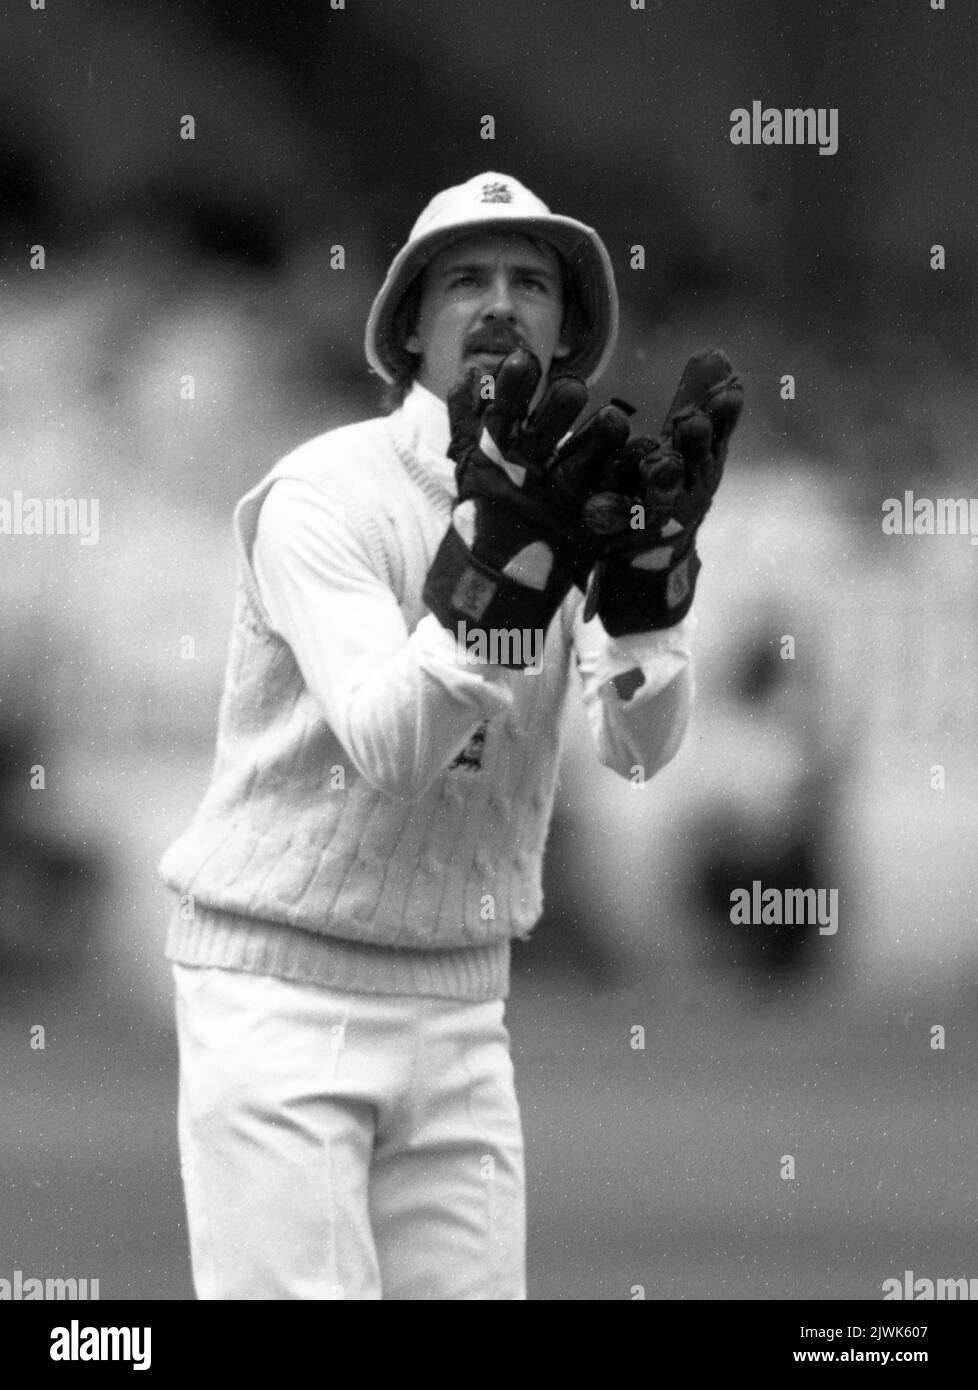 Cricket 2nd Test England versus NewZealand, Lords, 25 June 1990 England wicketkeeper Jack Russell  Photo by Tony Henshaw Stock Photo